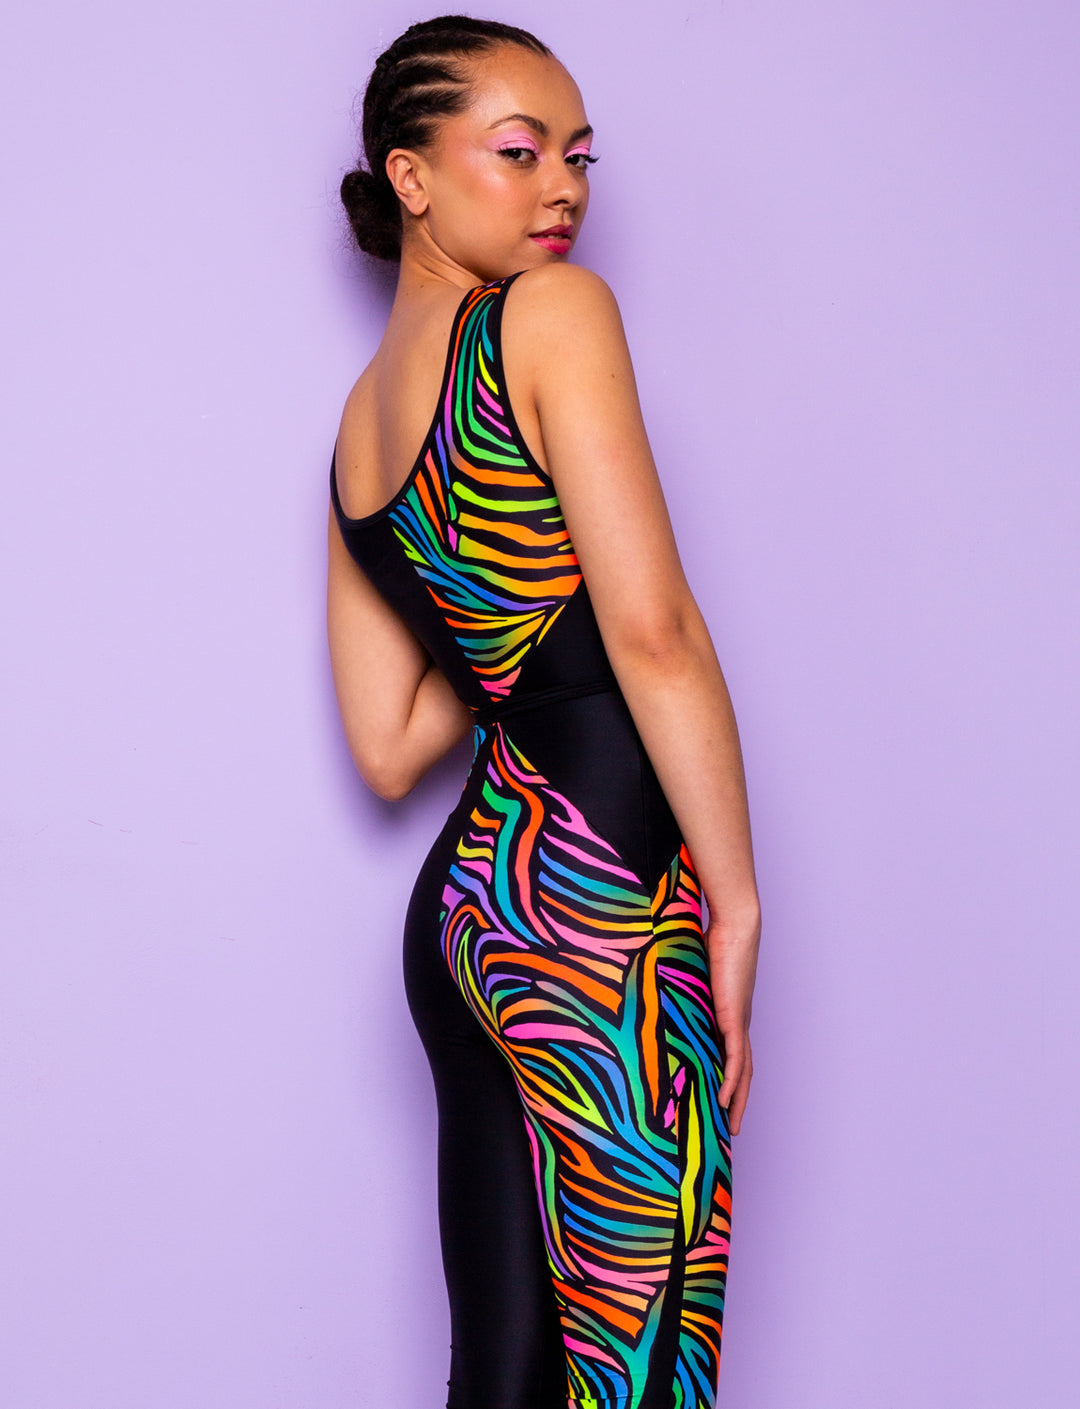 Side view of a woman wearing a printed lycra catsuit with rainbow zebra print and contrasting black panels.